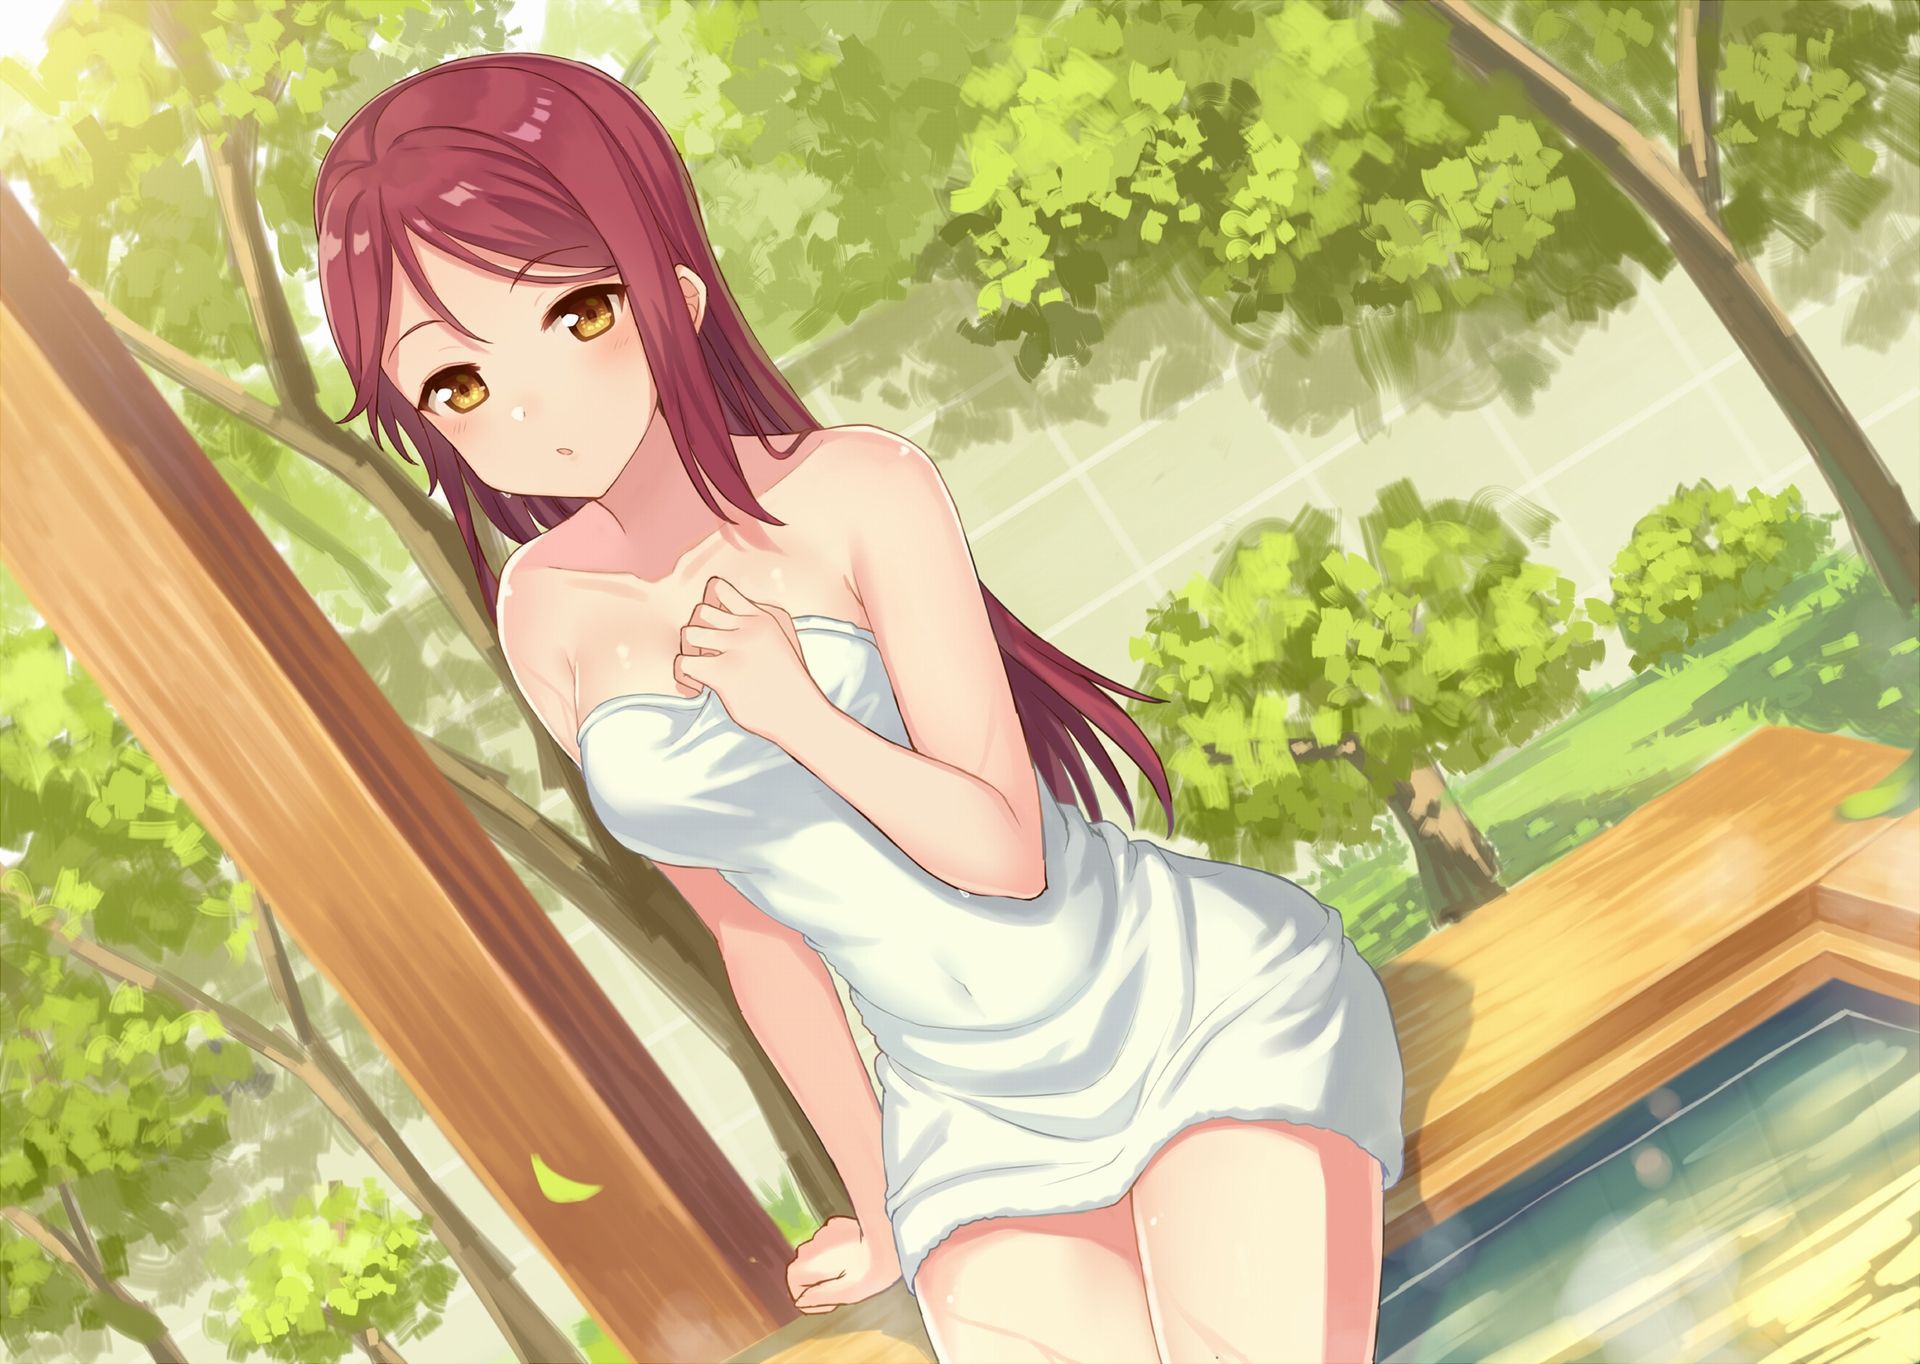 【Erotic Anime Summary】 Dosukebe Beauty and Beautiful Girls Hiding Their Nudity with a Single Towel 【Secondary Erotic】 13